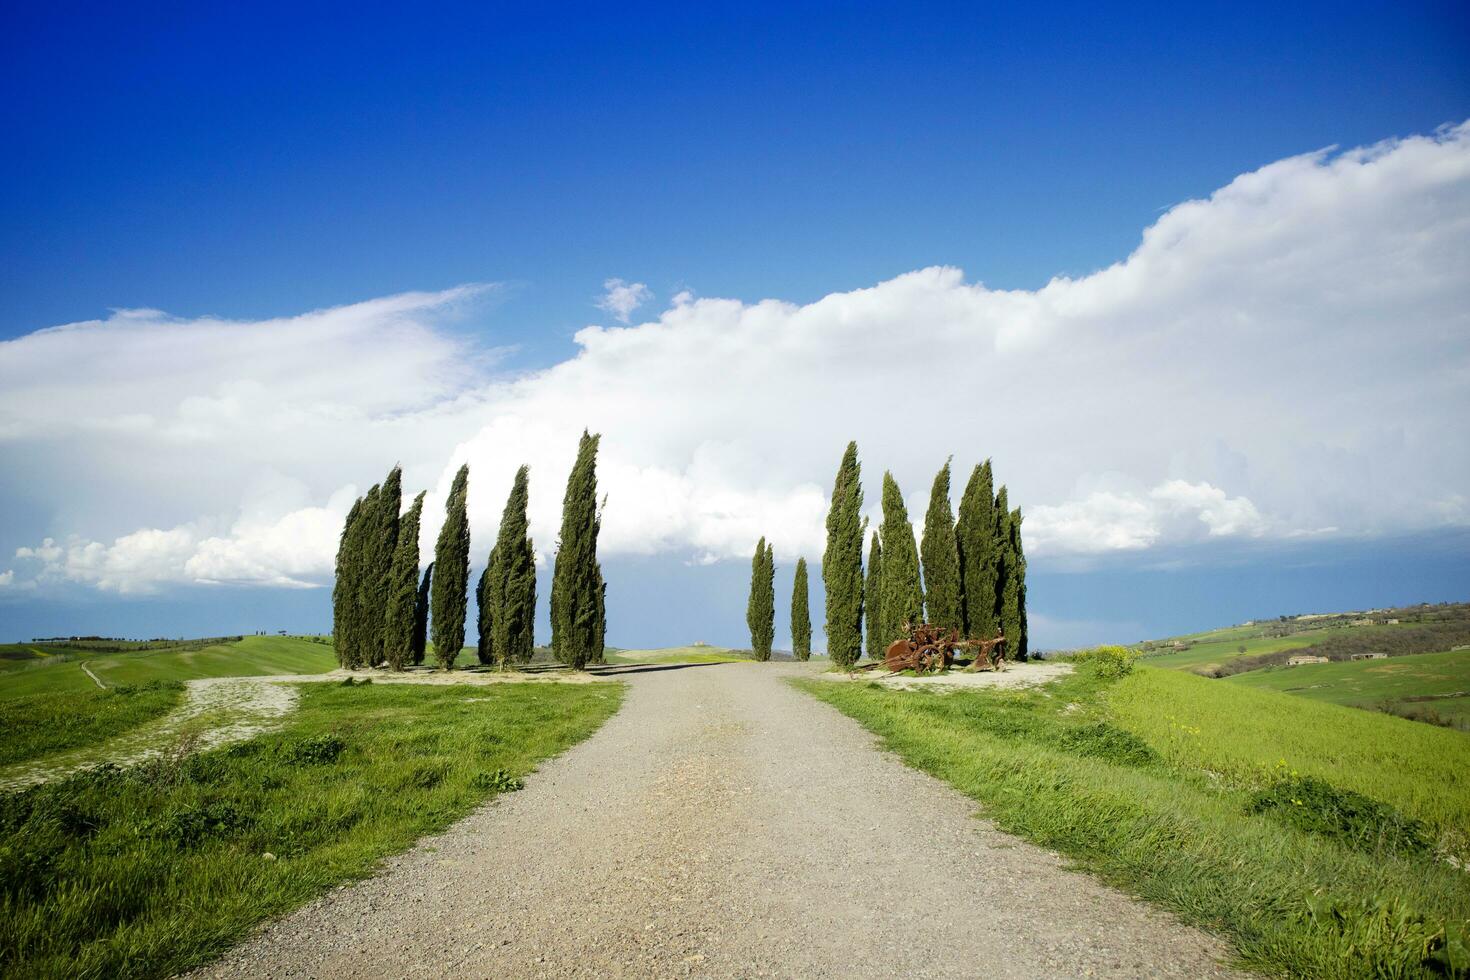 Photographic documentation of the cypresses in the province of Siena photo